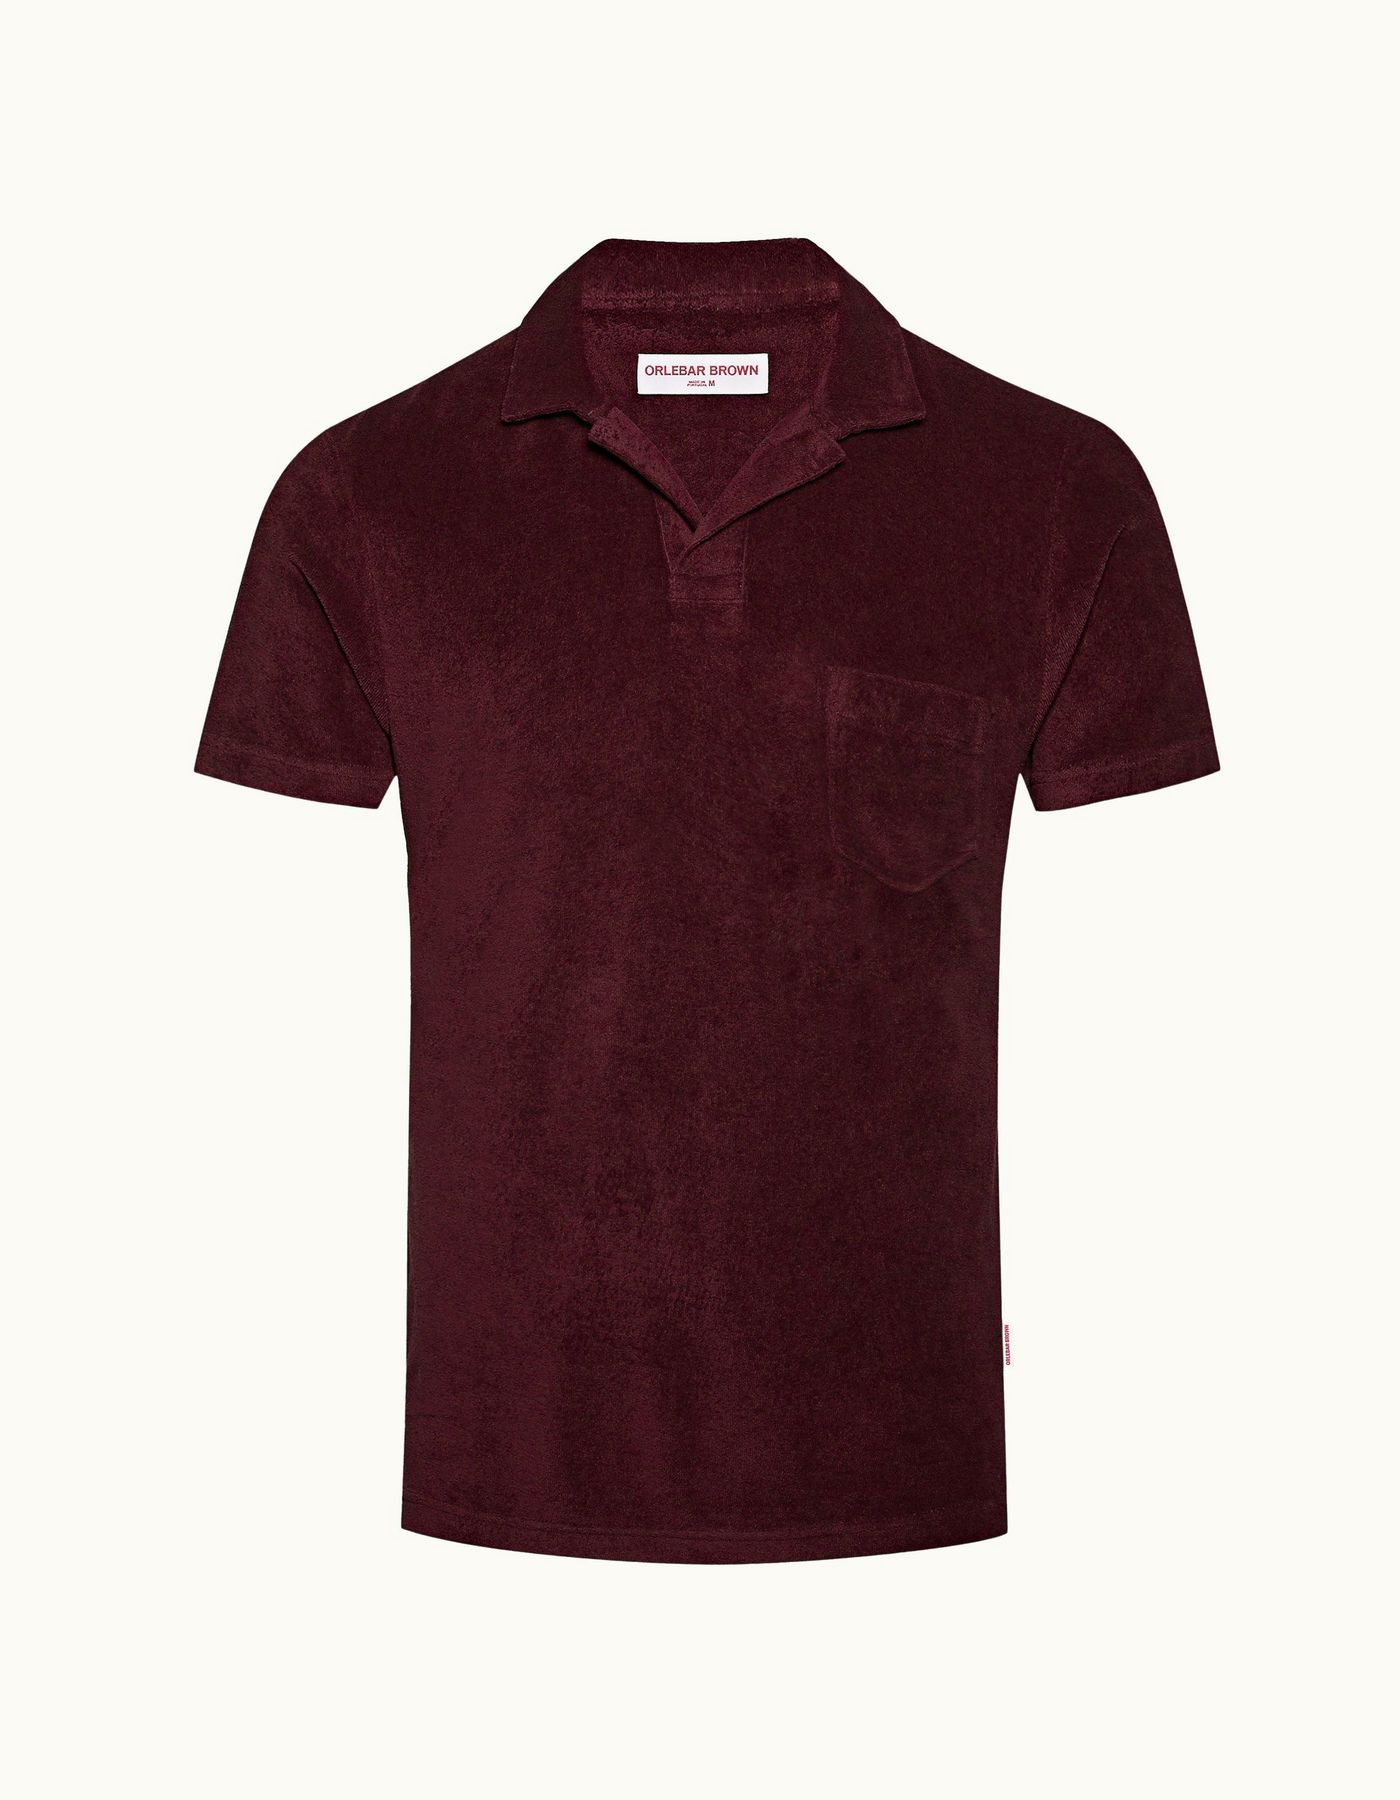 Terry Towelling - Mens Port Towelling Resort Polo Shirt